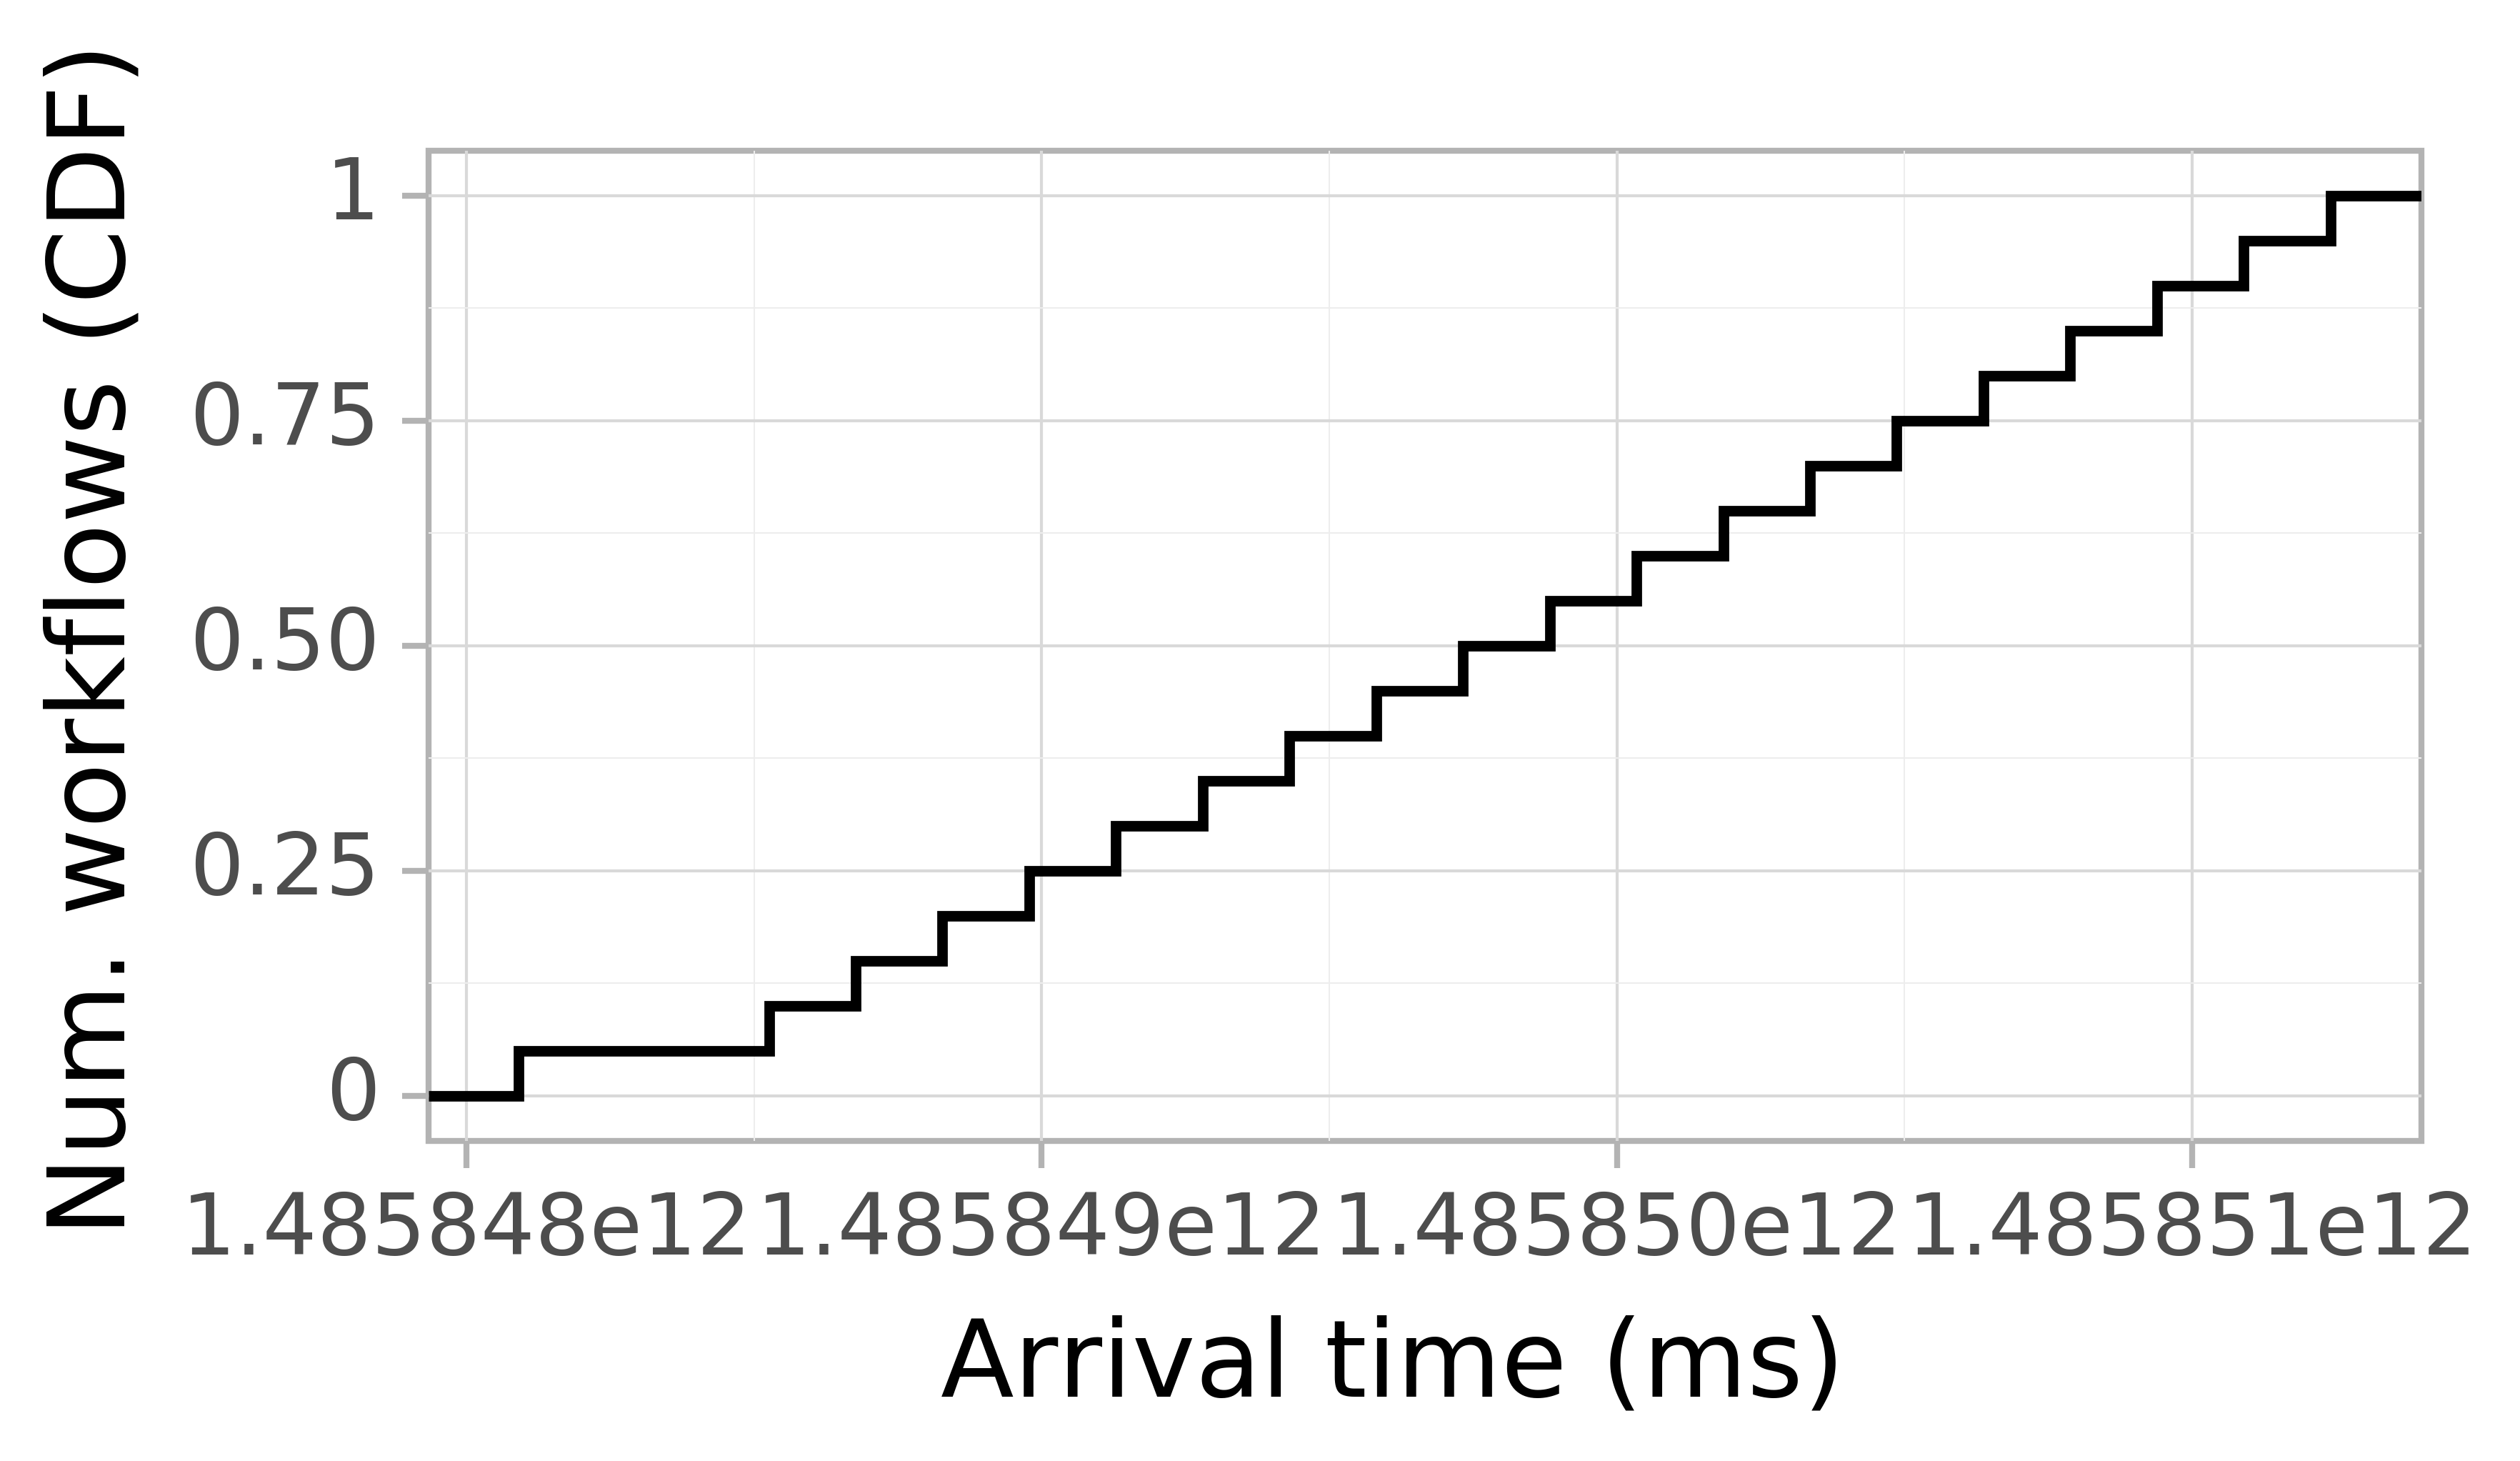 Job arrival CDF graph for the askalon-new_ee7 trace.